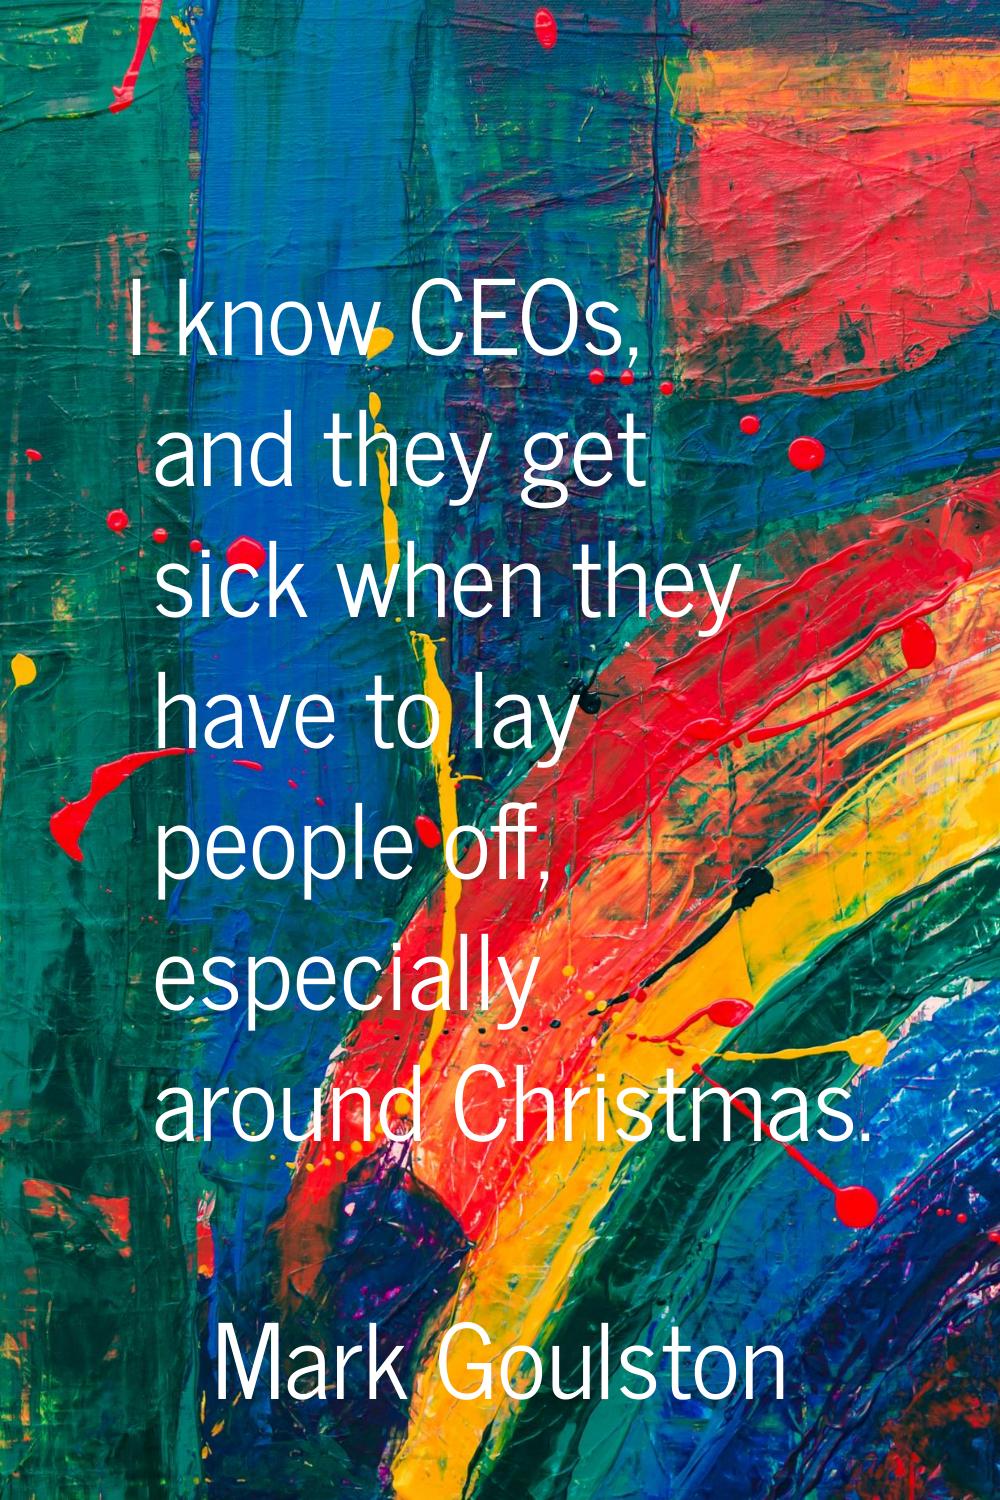 I know CEOs, and they get sick when they have to lay people off, especially around Christmas.